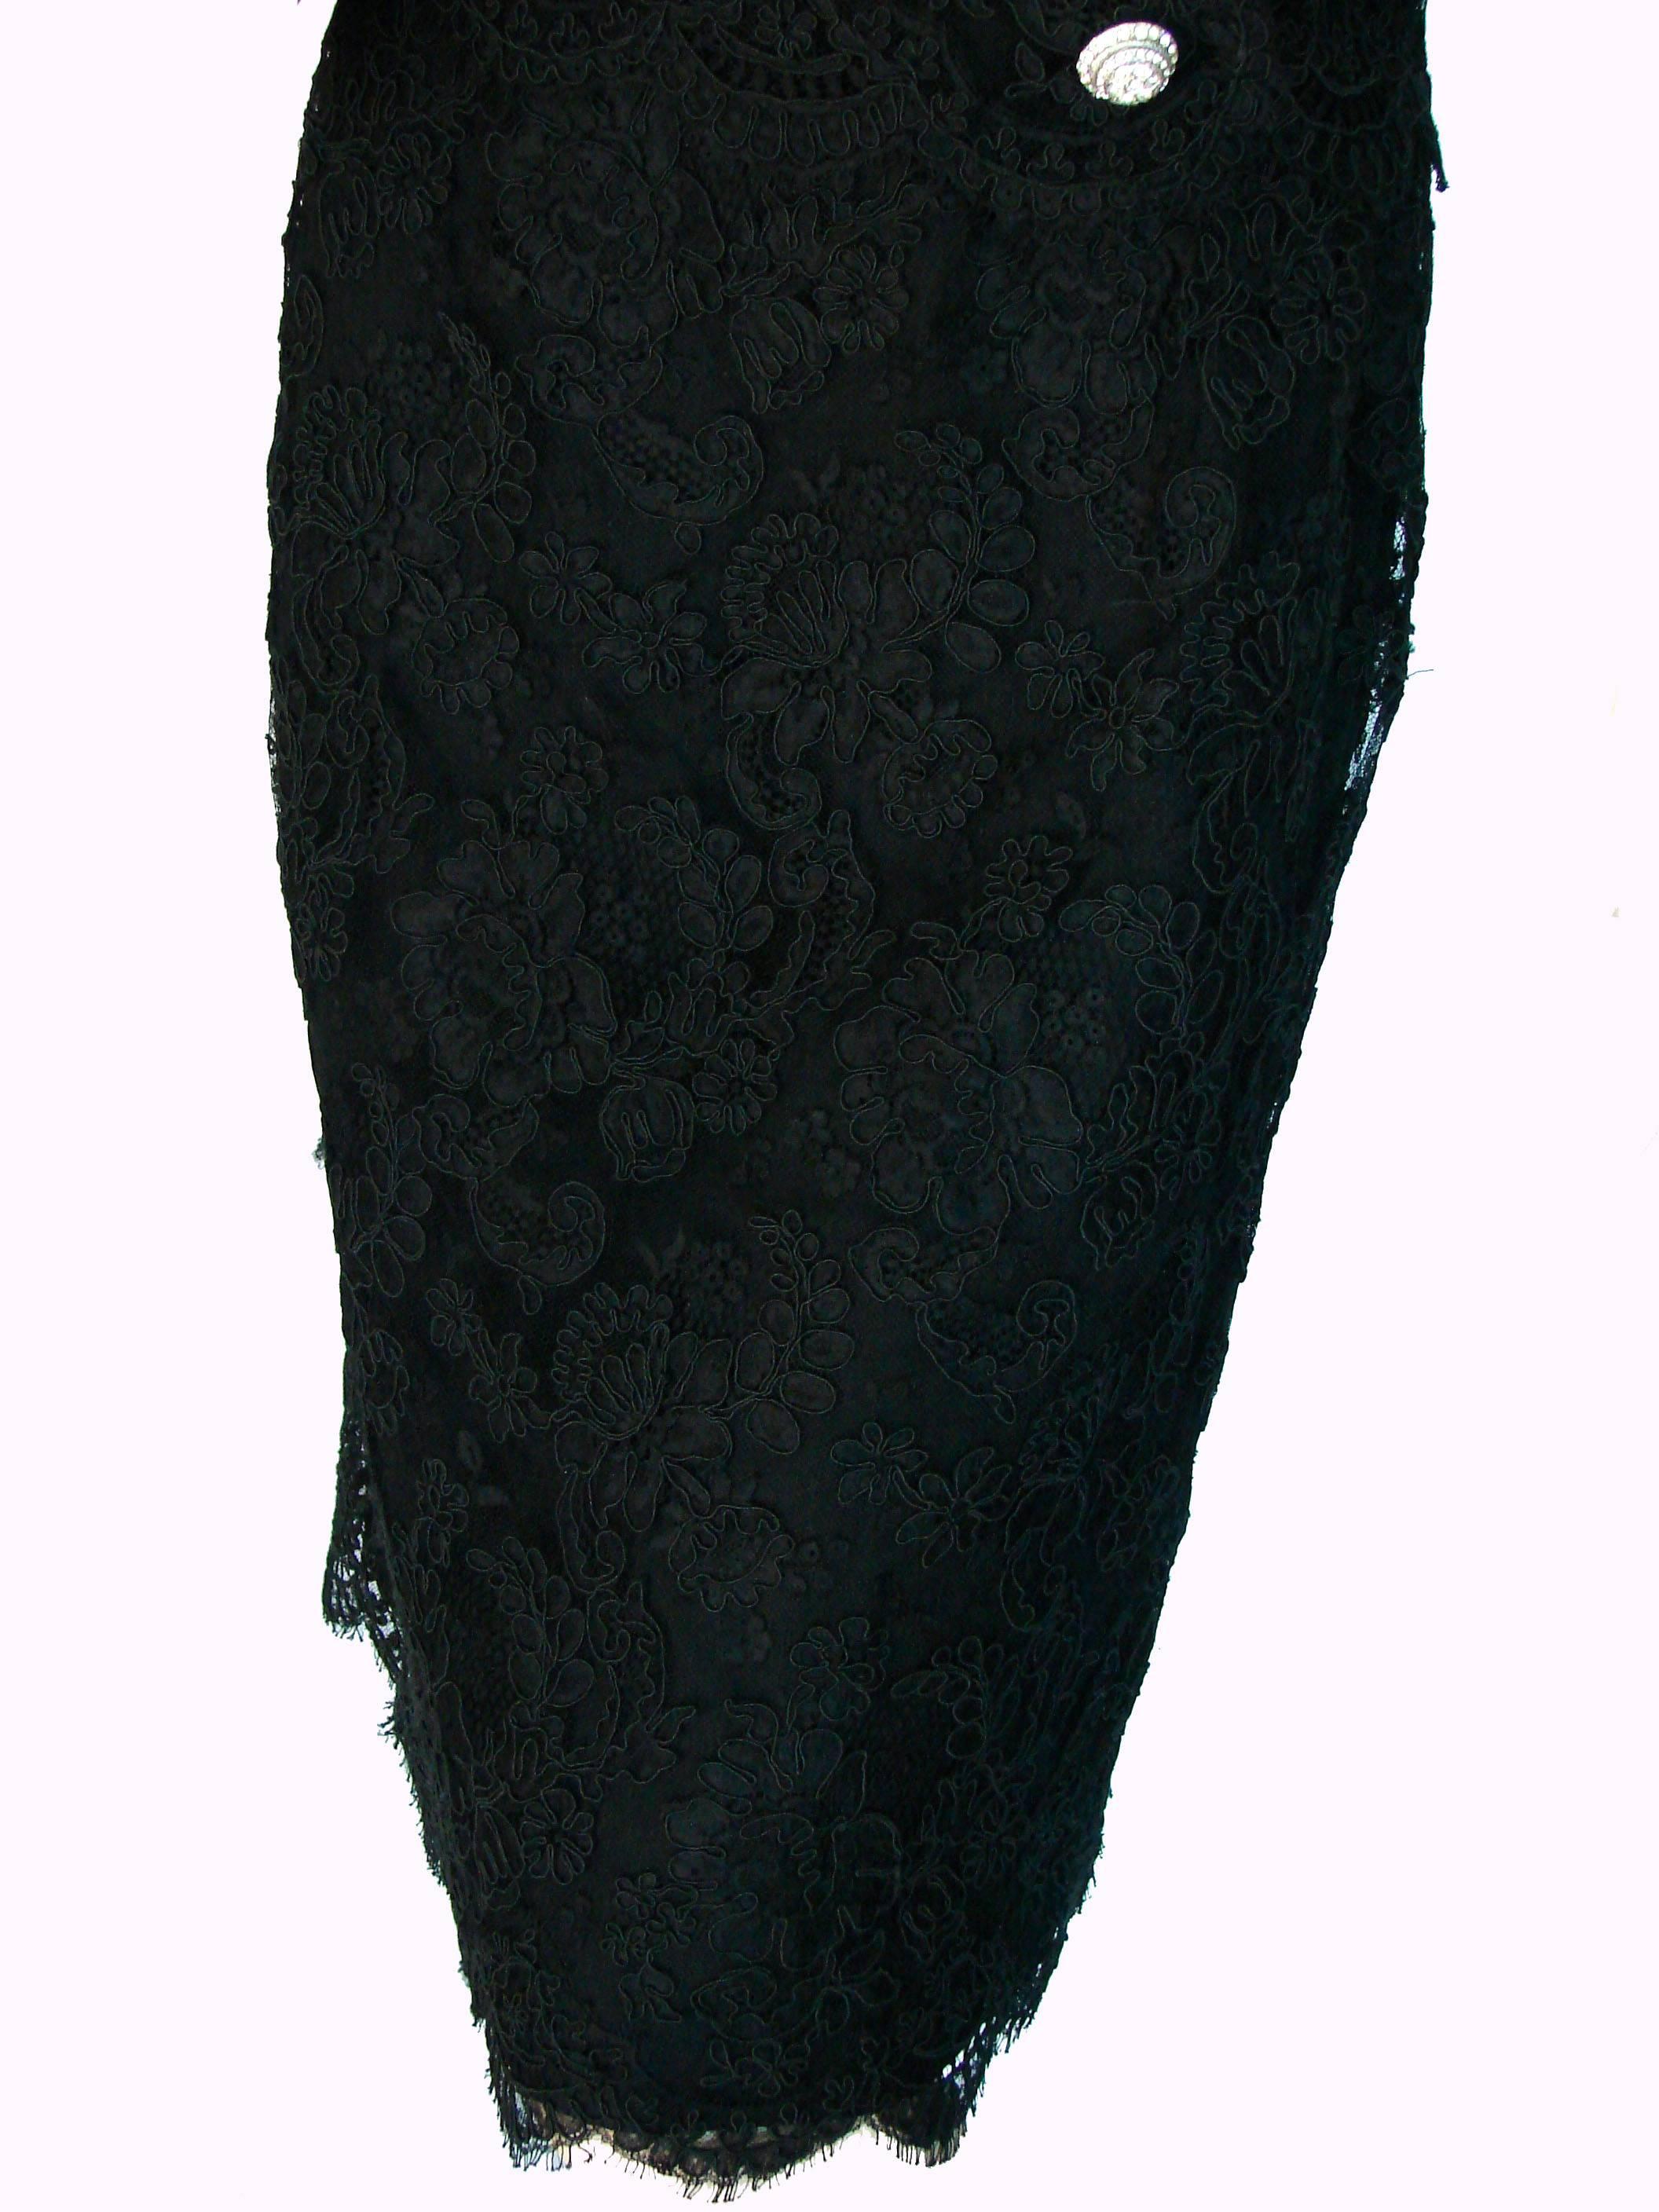 Harvey Berin Black Lace One Shoulder Cocktail Dress Rhinestone Buttons 60s sz12 In Excellent Condition In Port Saint Lucie, FL